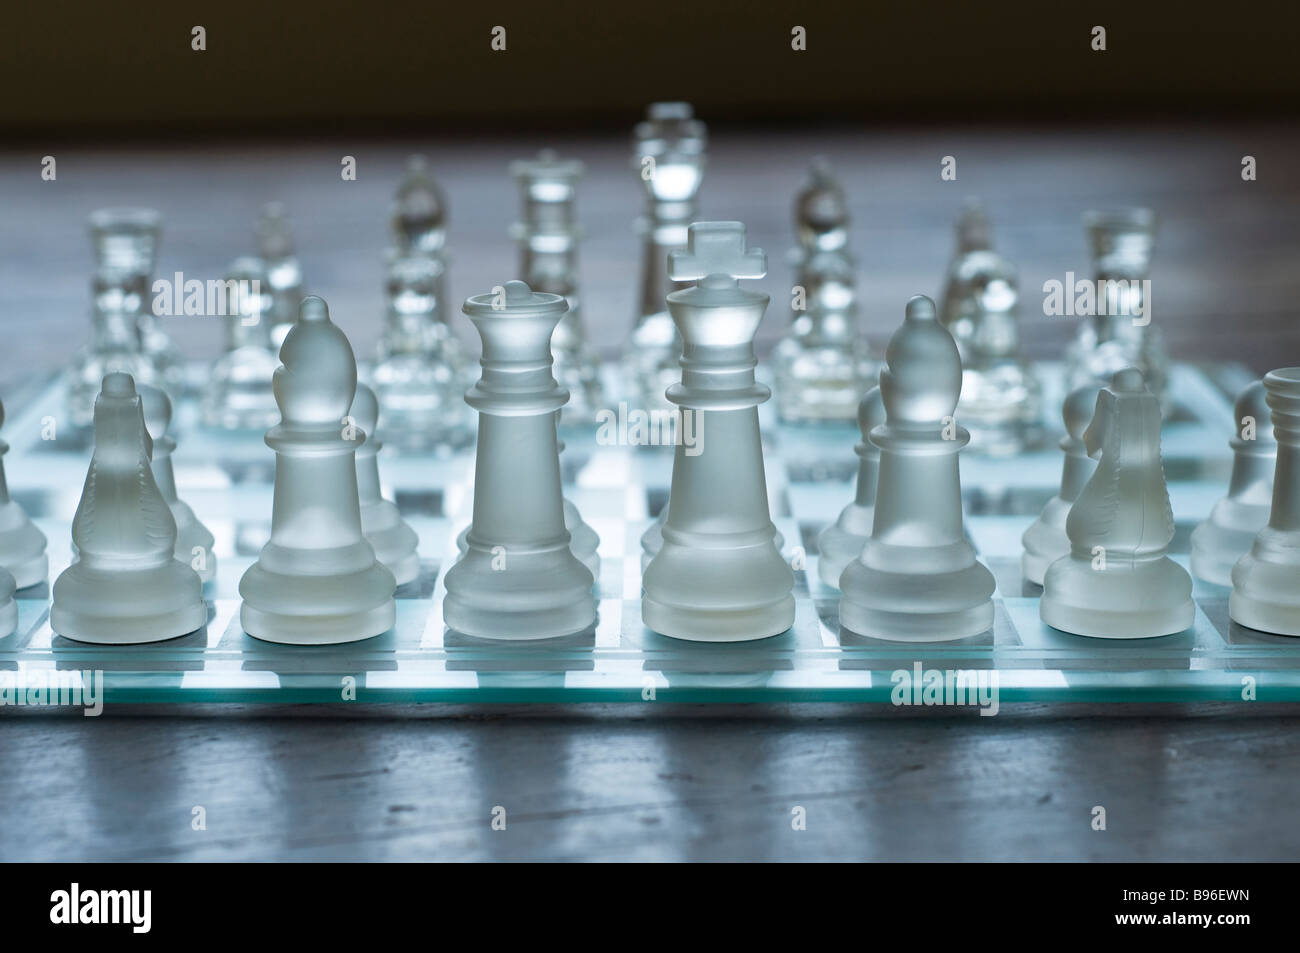 Eye level view of glass chess set on a wooden floor Stock Photo